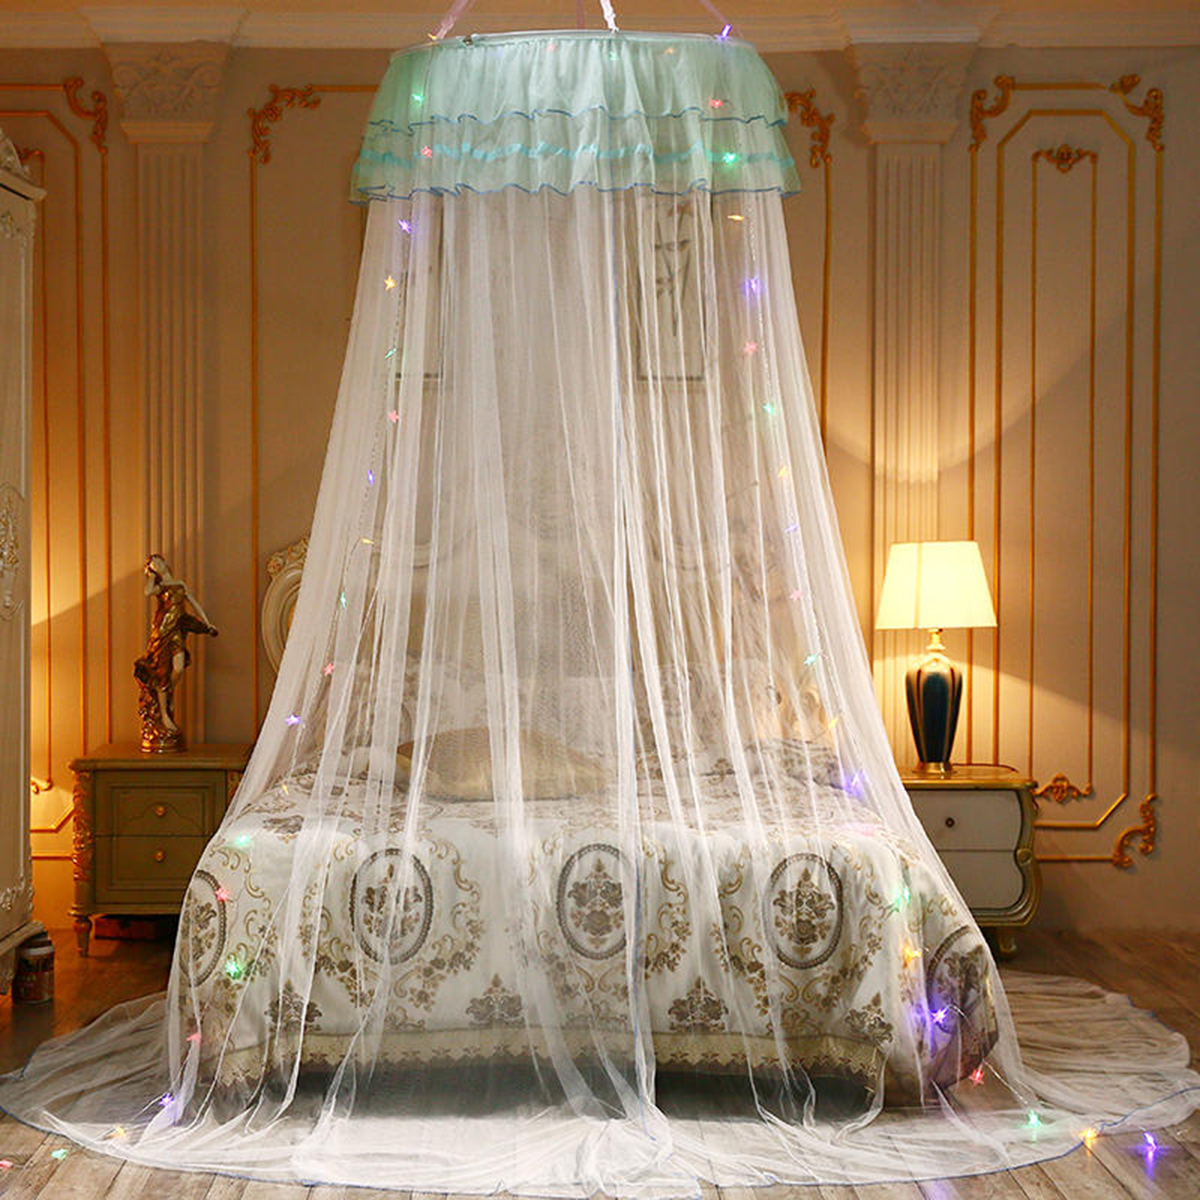 Mosquito-Net-Bedding-Lace-LED-Light-Princess-Dome-Mesh-Bed-Canopy-Bedroom-Decor-1682937-4